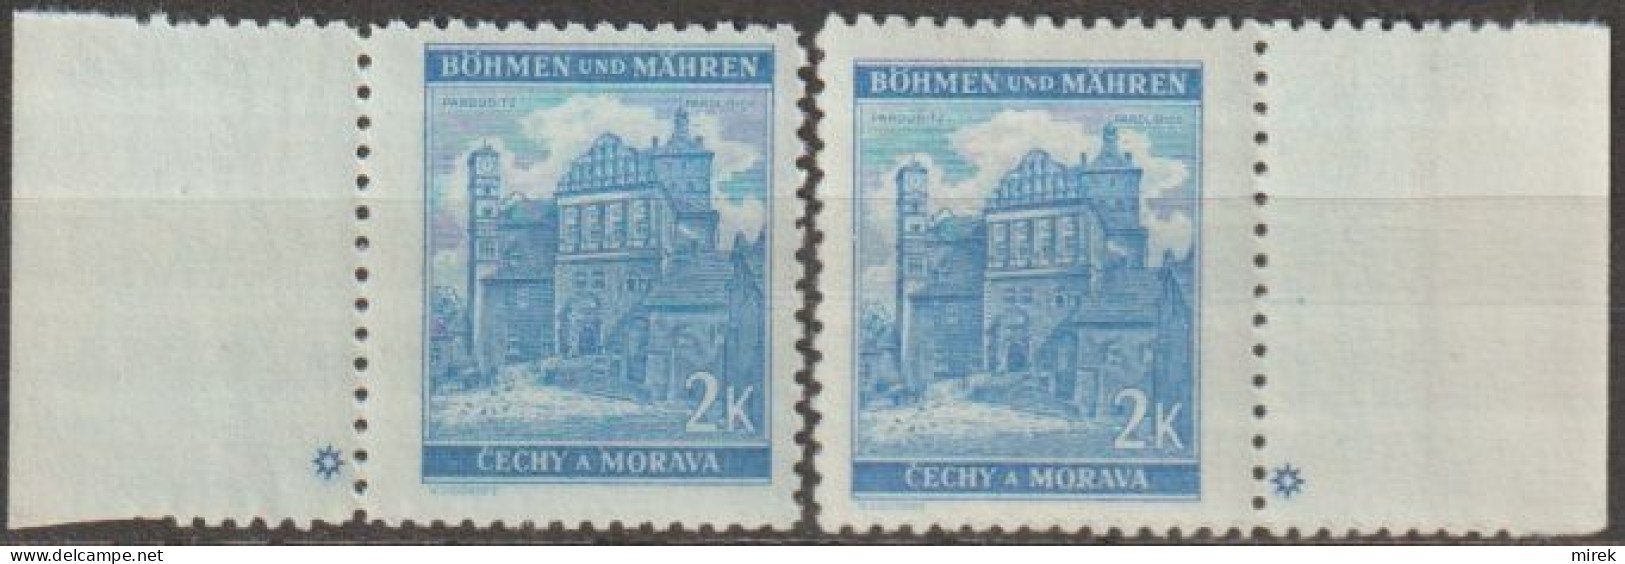 024/ Pof. 59, Clear Blue (very Rare), Border Stamps, Plate Mark * - Neufs